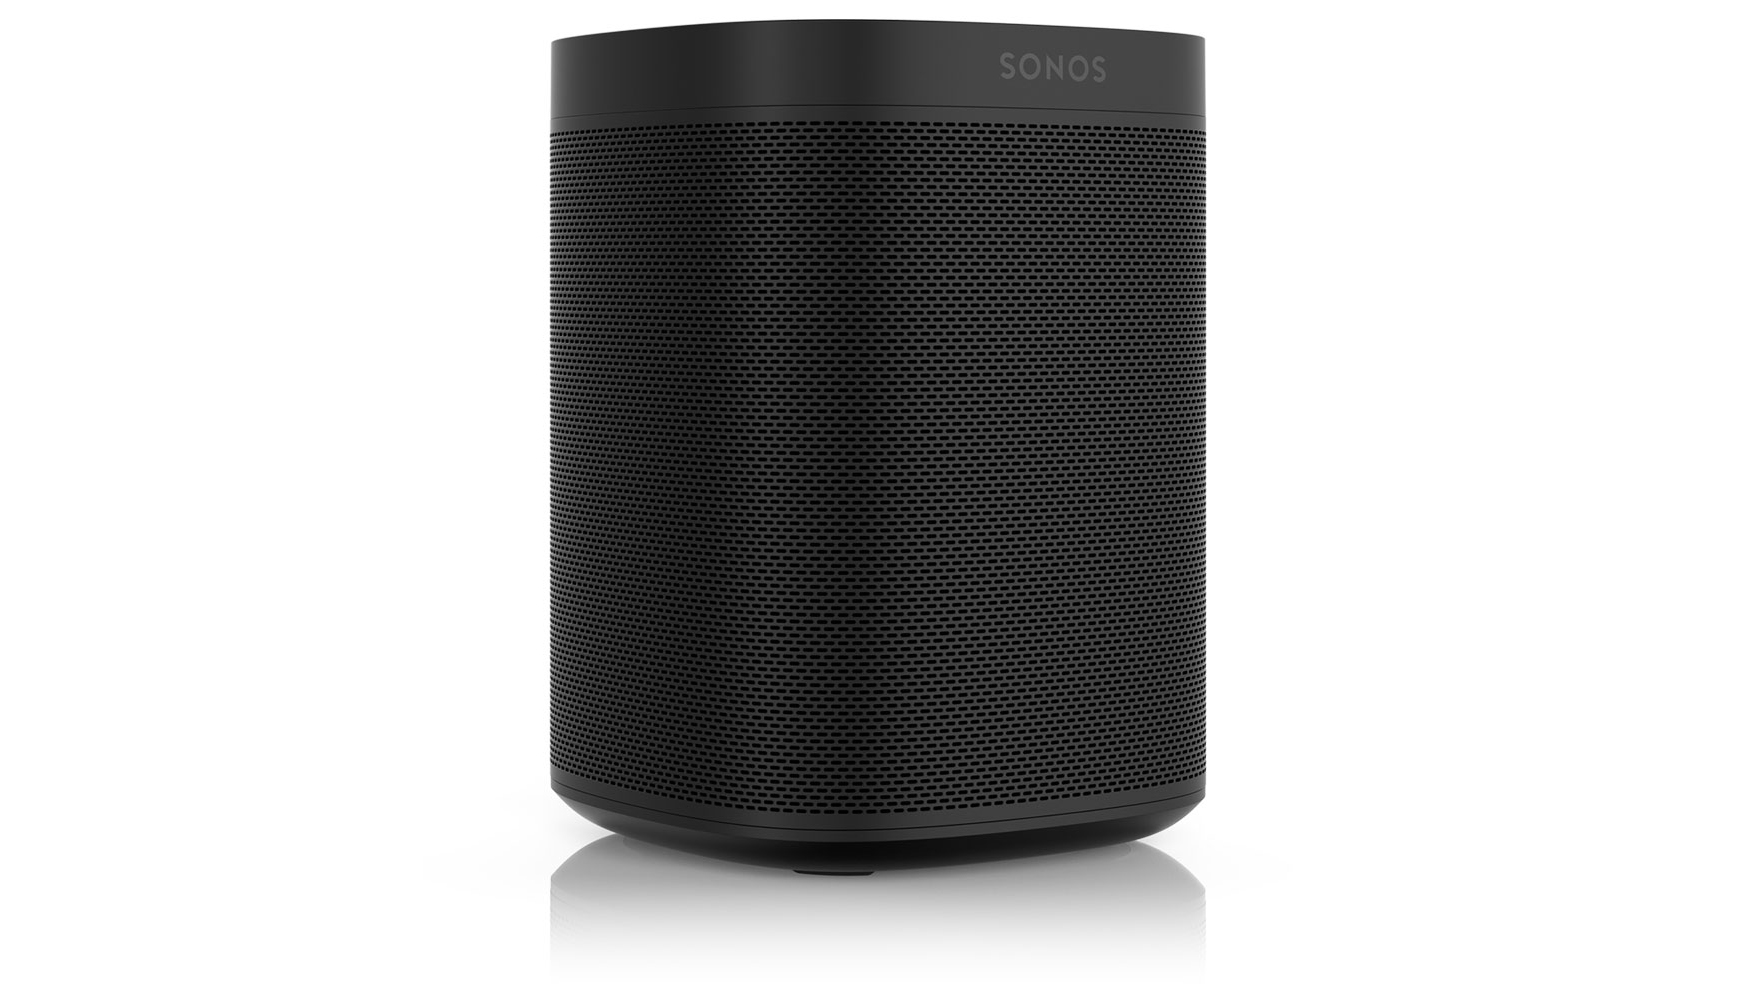 The cheapest Sonos sales and deals for March 2023